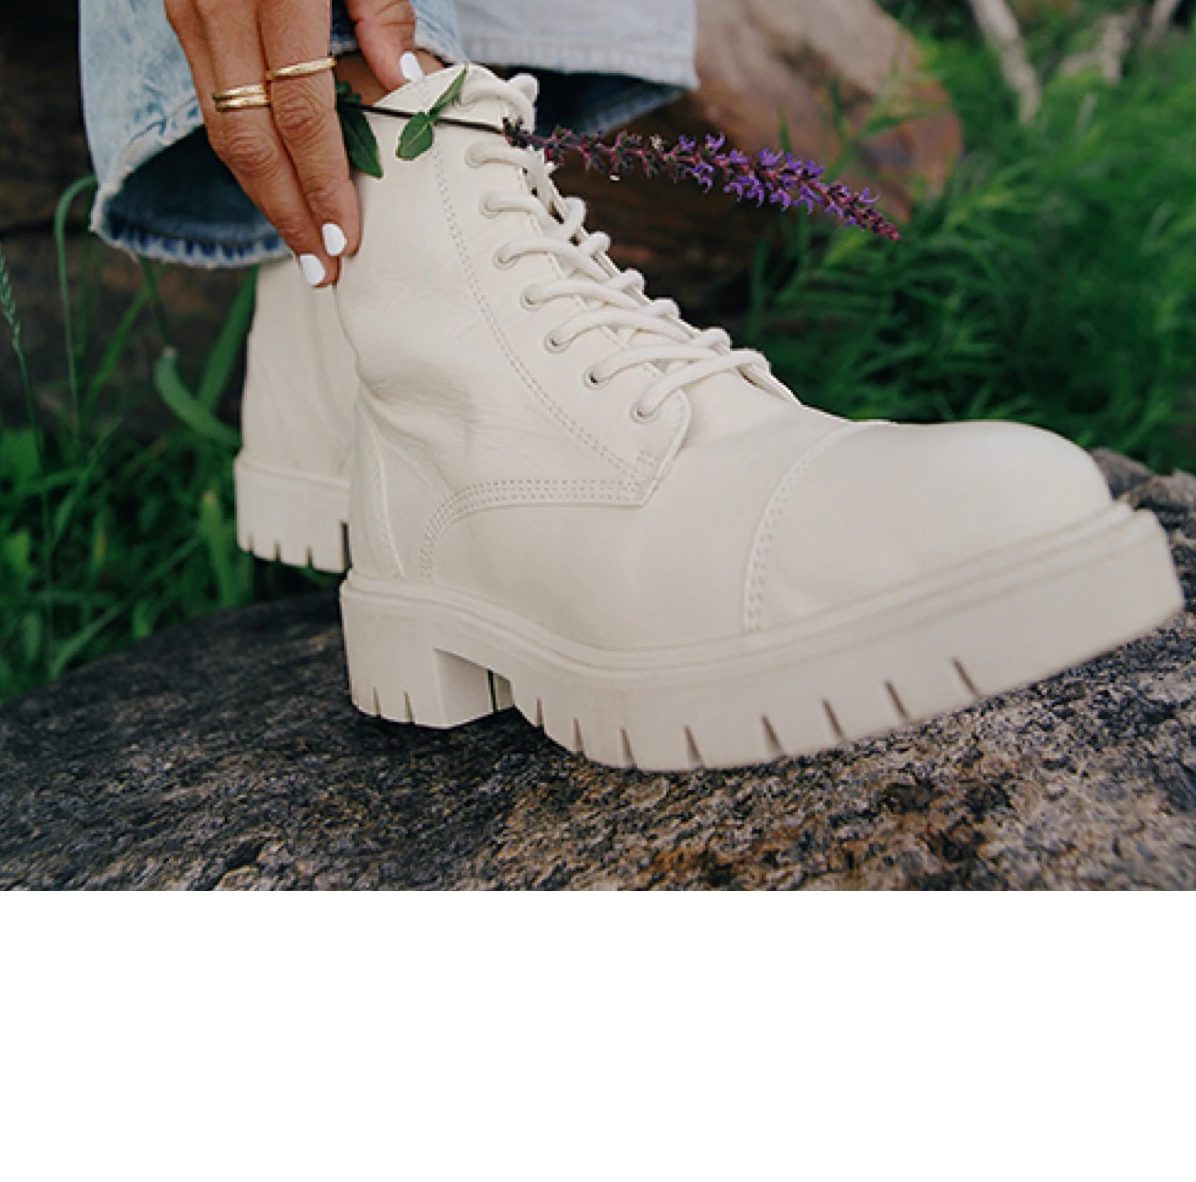 A person wearing chunky combat boots